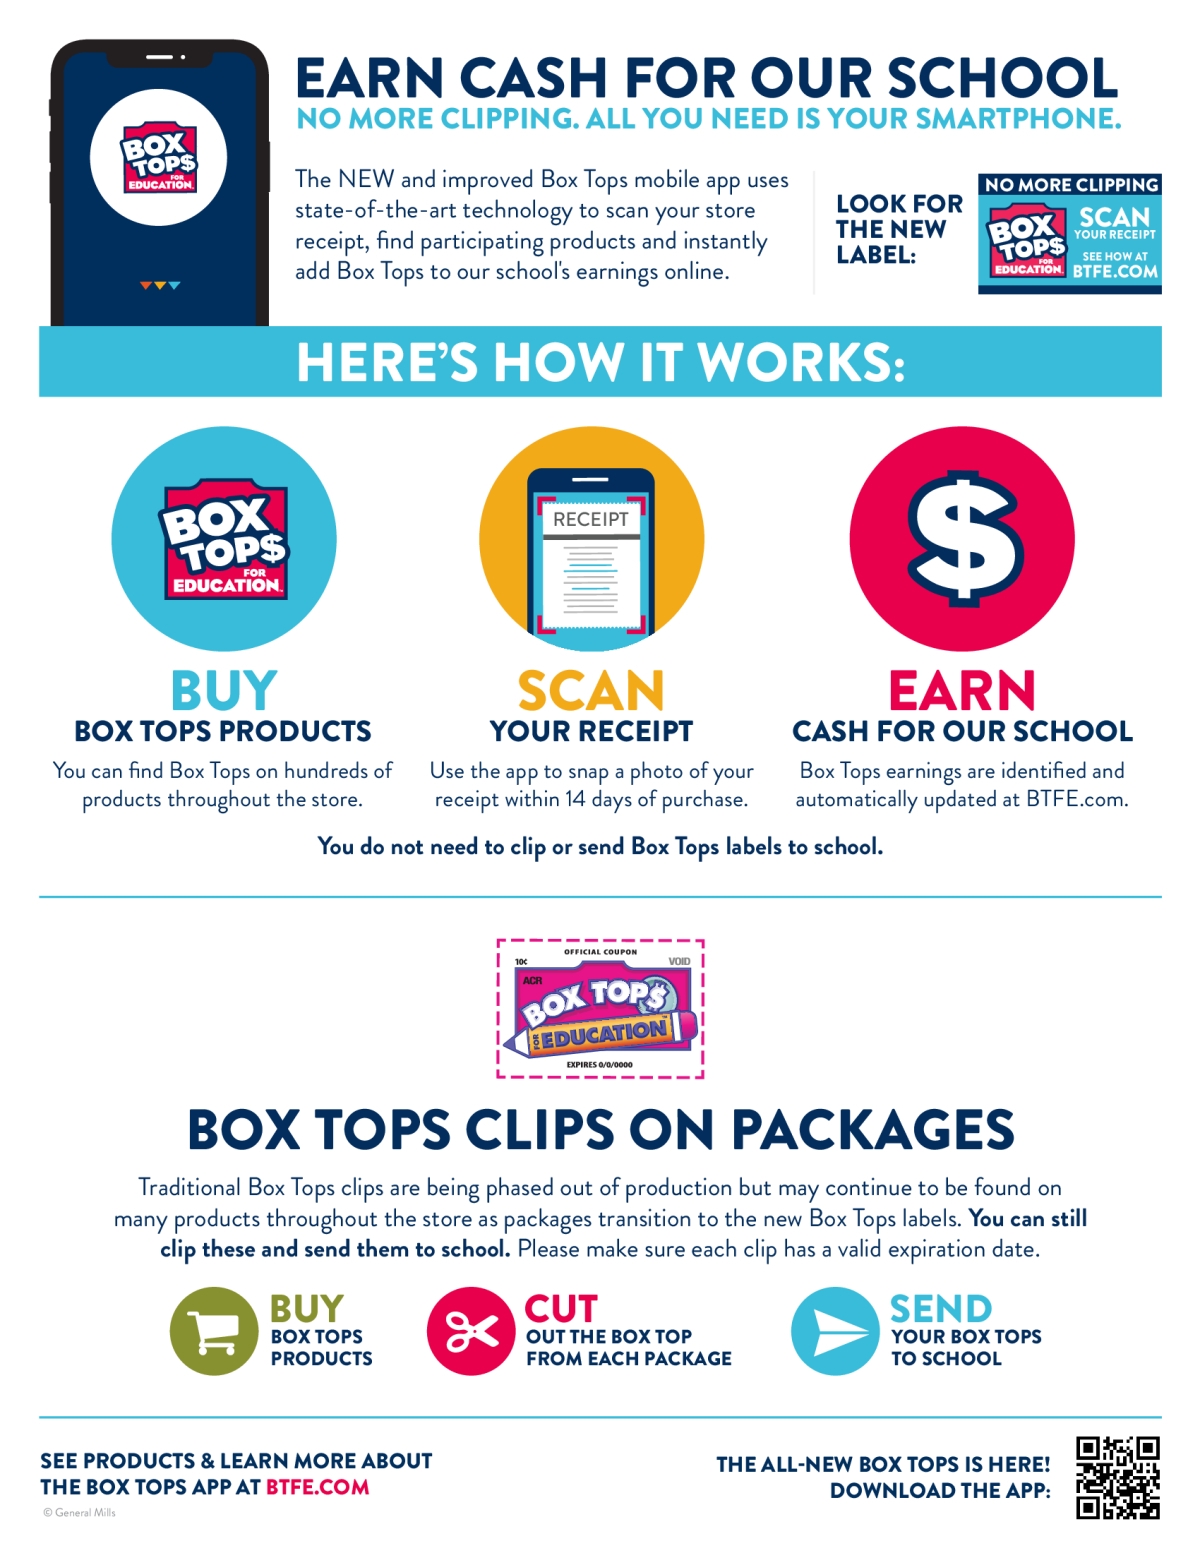 BOX TOPS OVERVIEW